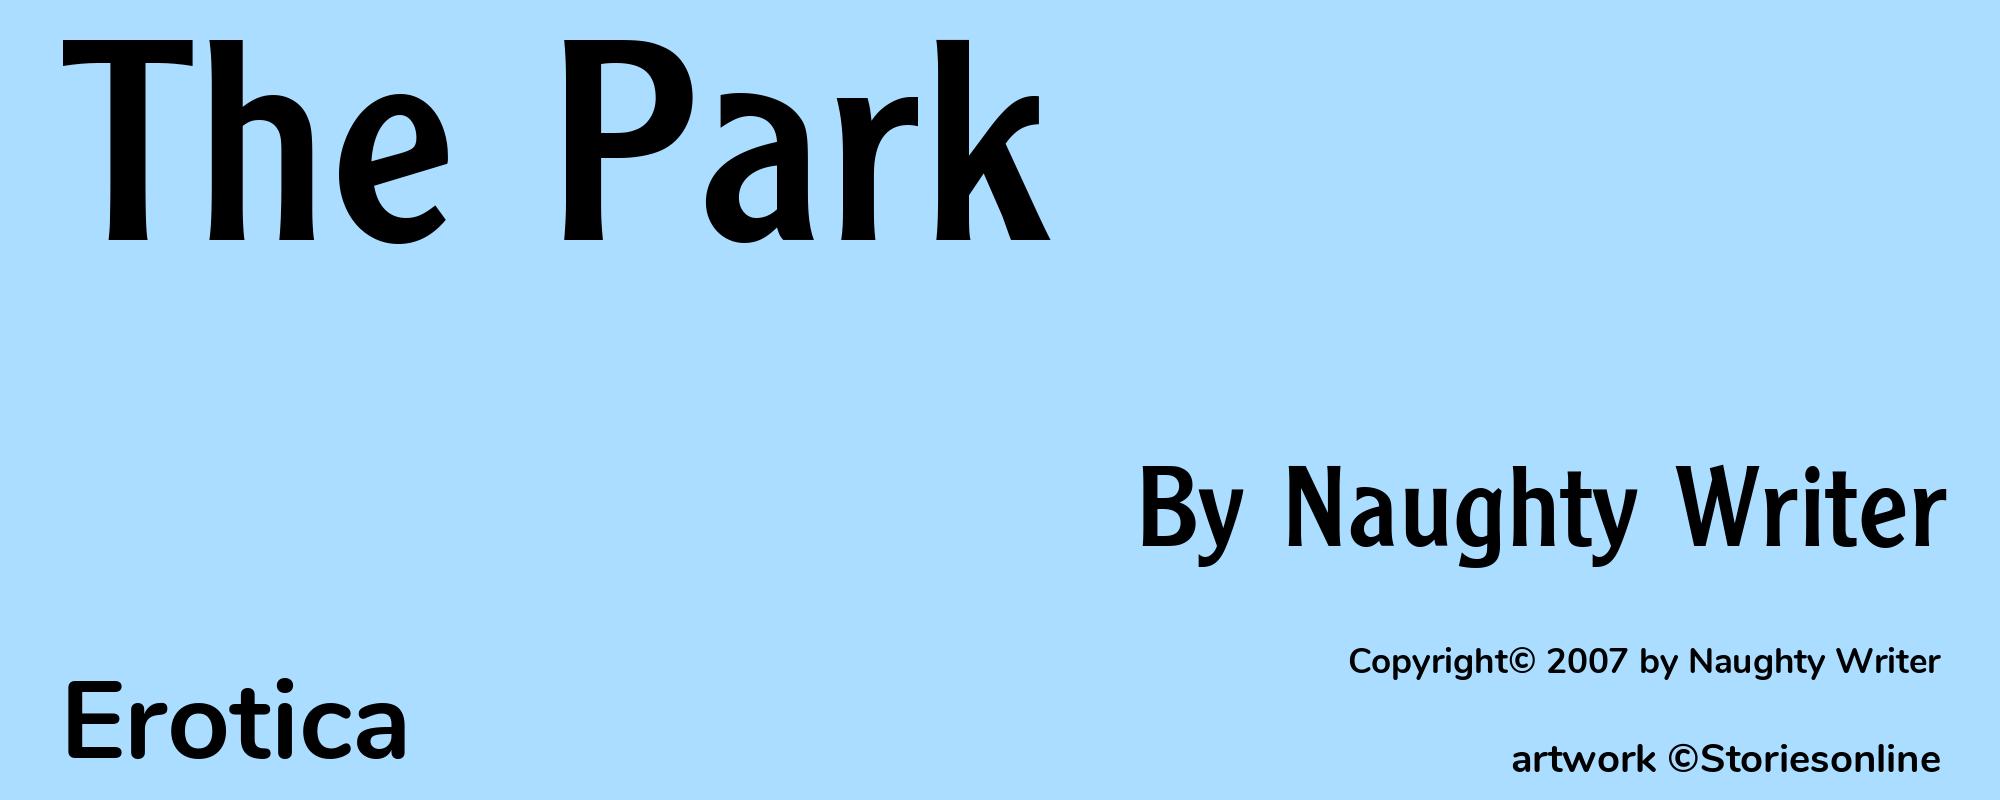 The Park - Cover